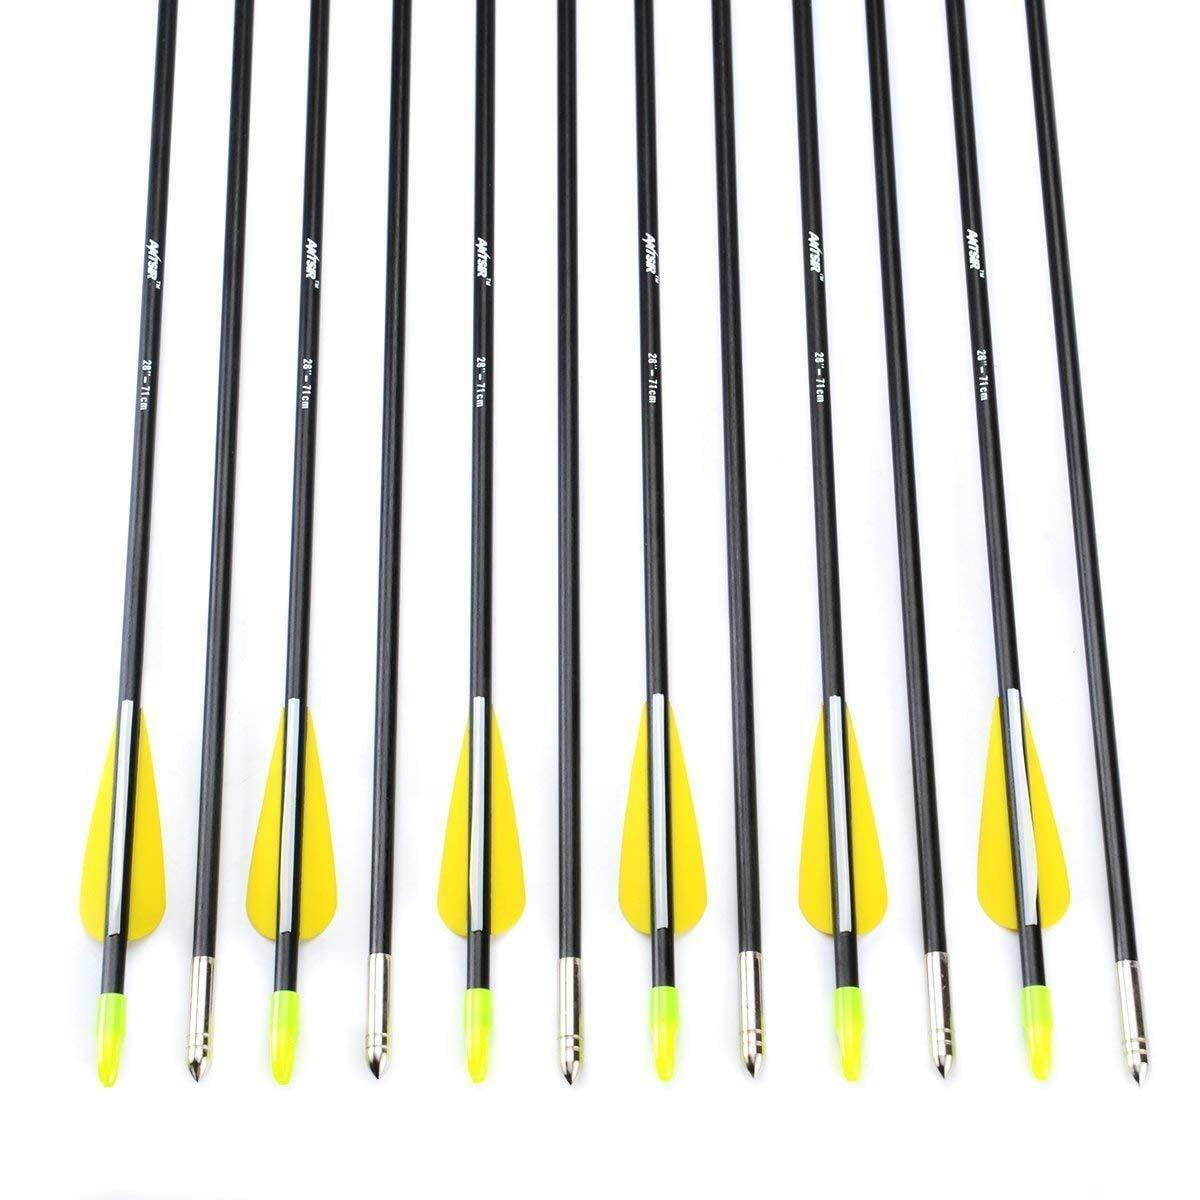 XIAOYUEGULANG 12Pcs 28-32 Fiberglass Archery Target Arrows Practice Arrows or Youth Arrows for Recurve & Compound Bow Arrows 